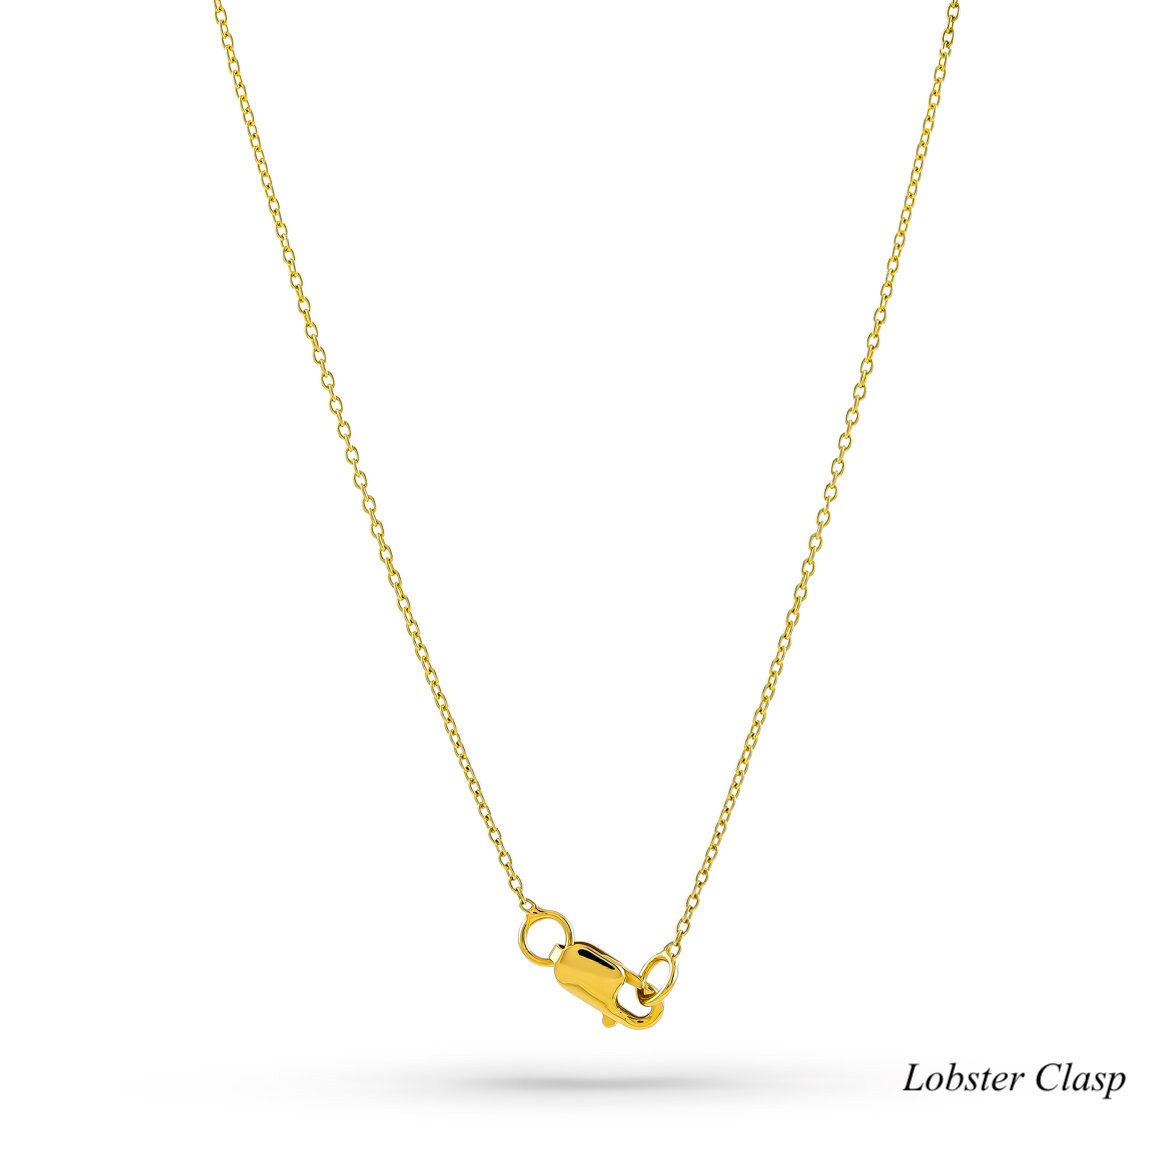 Diamond Lariat Necklace Available in 14K and 18K Gold